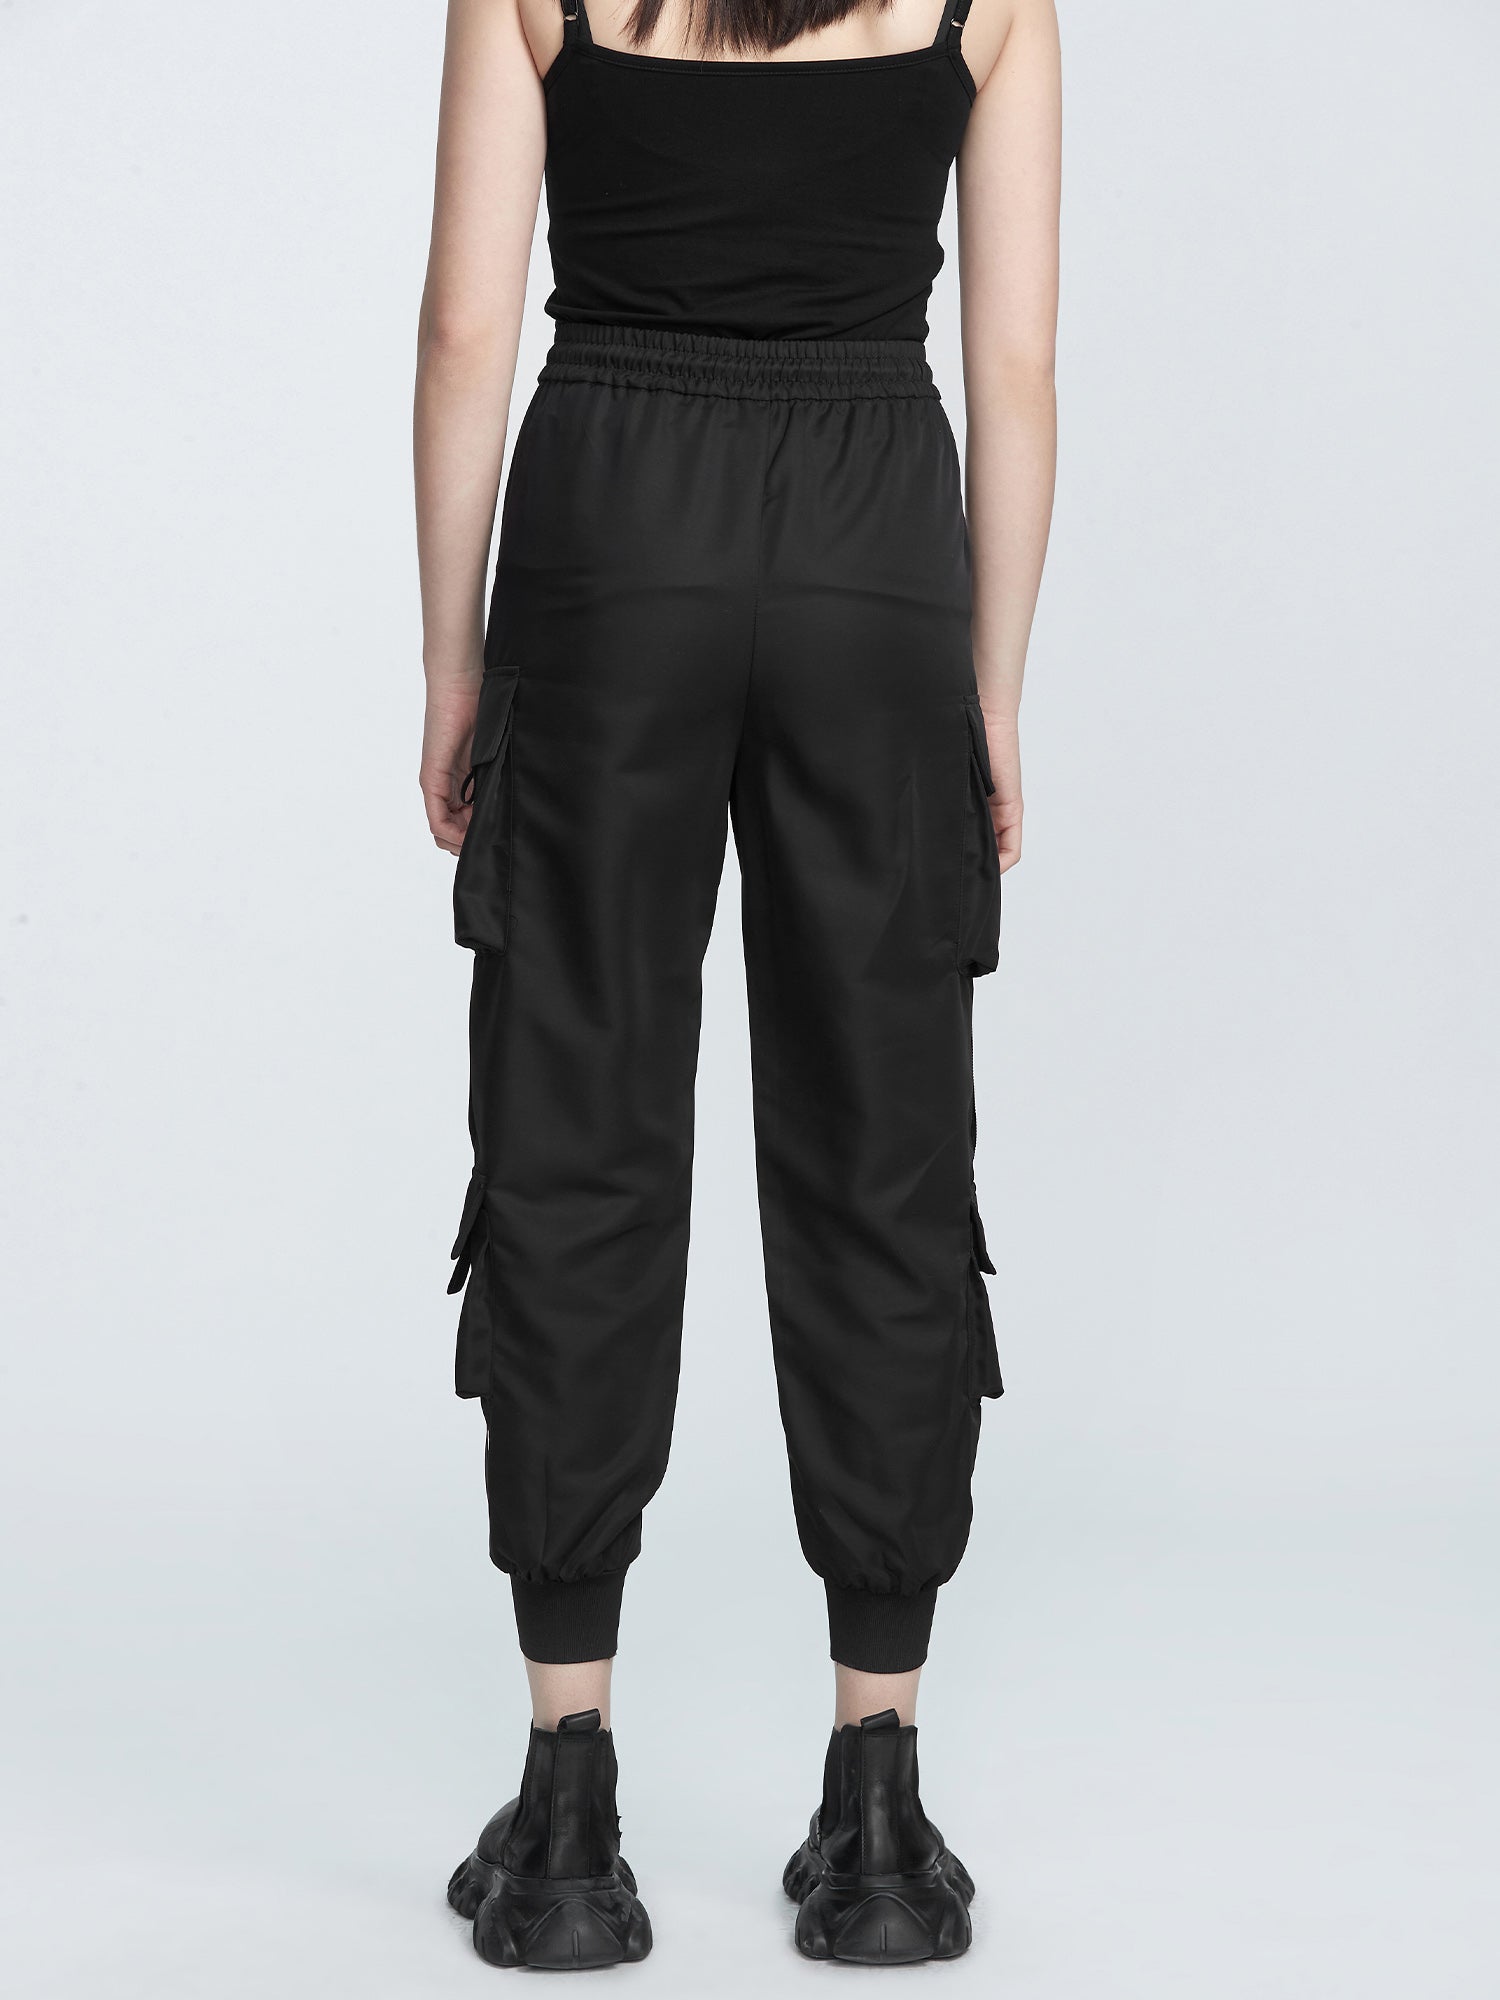 Slim Joggers Workout Pants With Deep Pockets - S·DEER